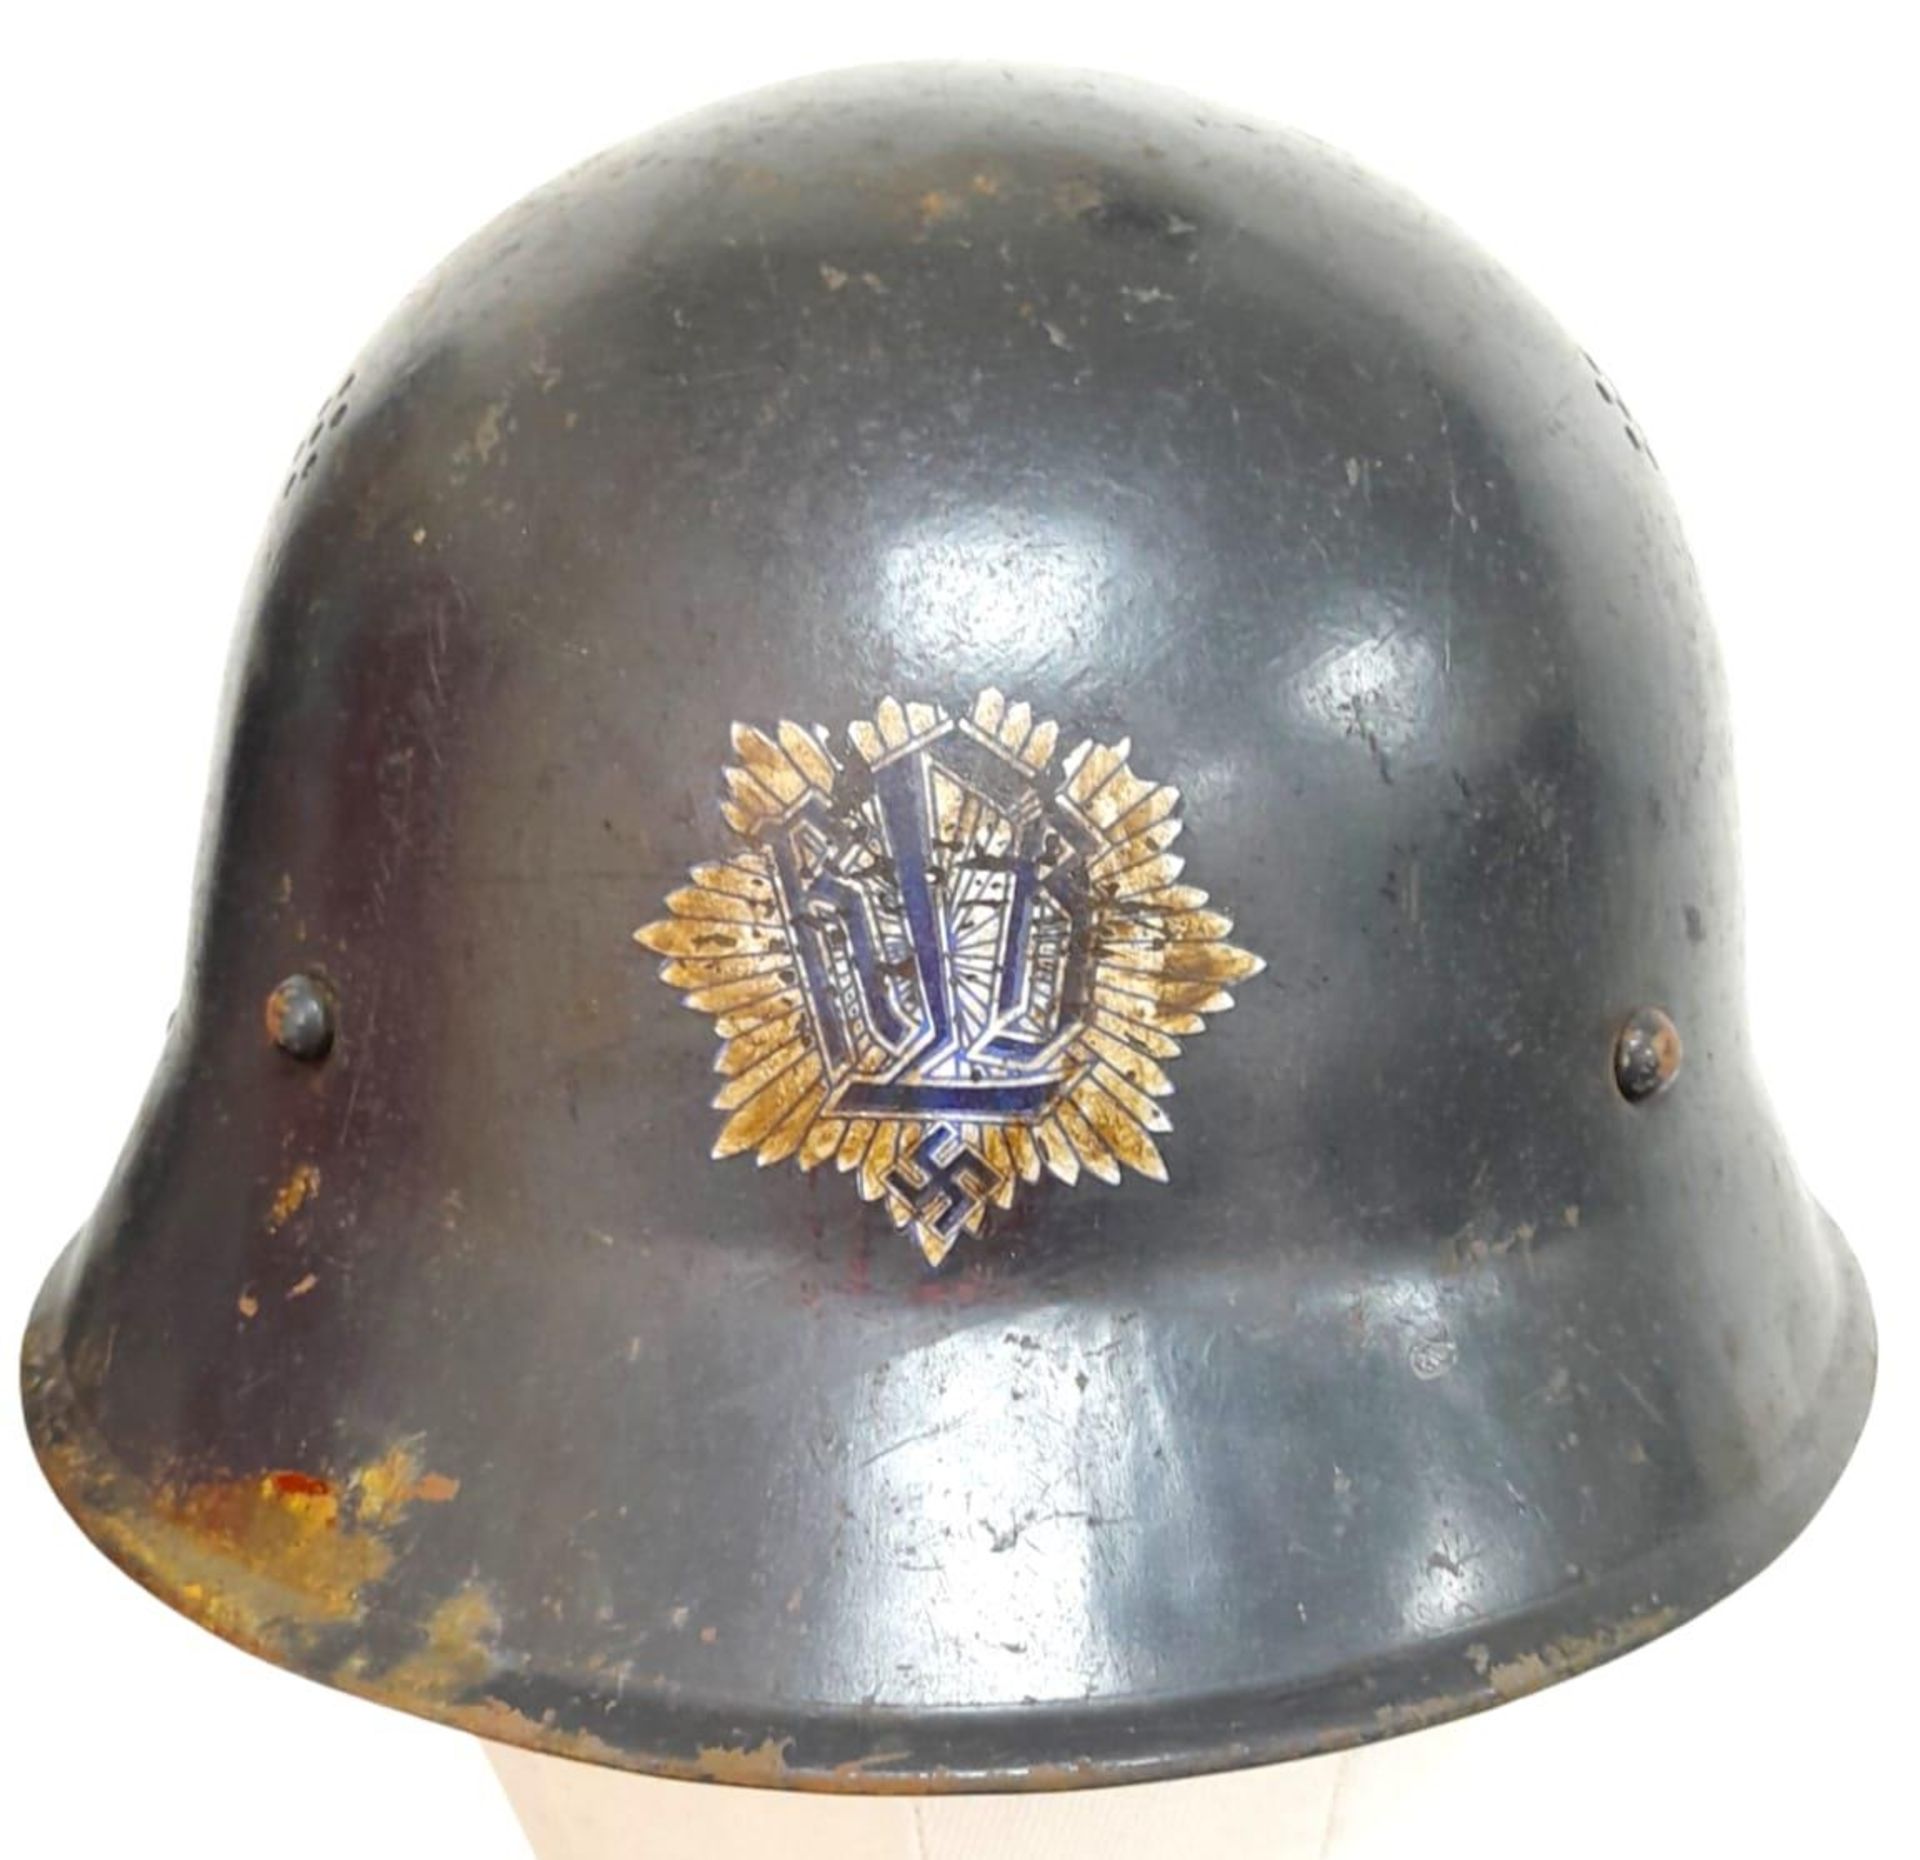 WW2 Czech M30 Helmet used by the German RLB (Air Raid Warden) Apart form the re-cycling element,